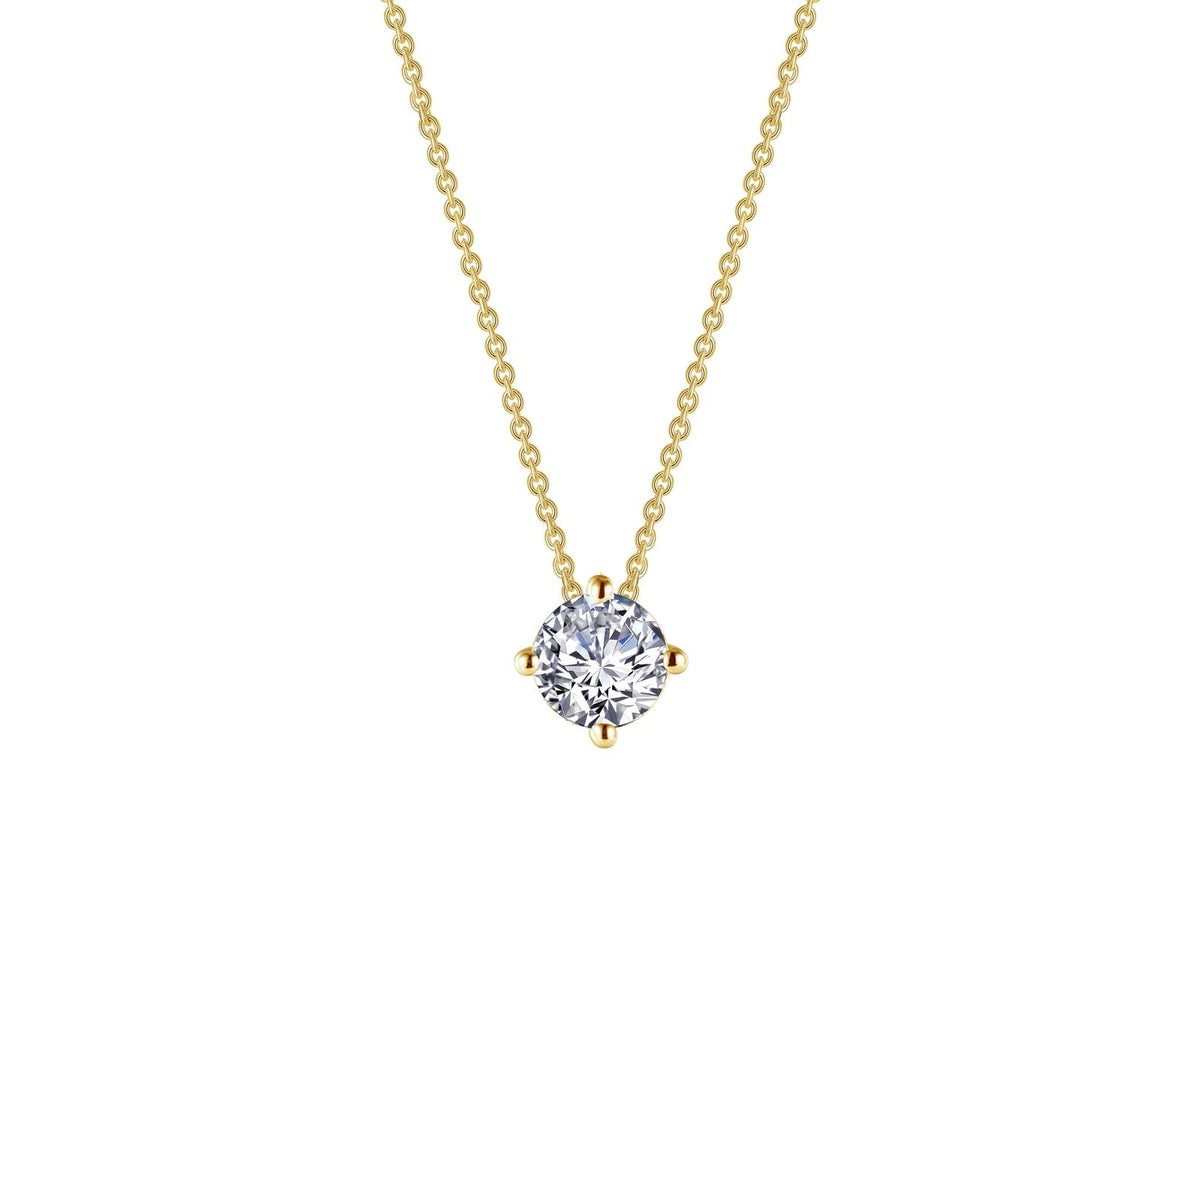 Lafonn Simulated Diamond 0.85ct East West Prong Solitaire Necklace N0173CLG